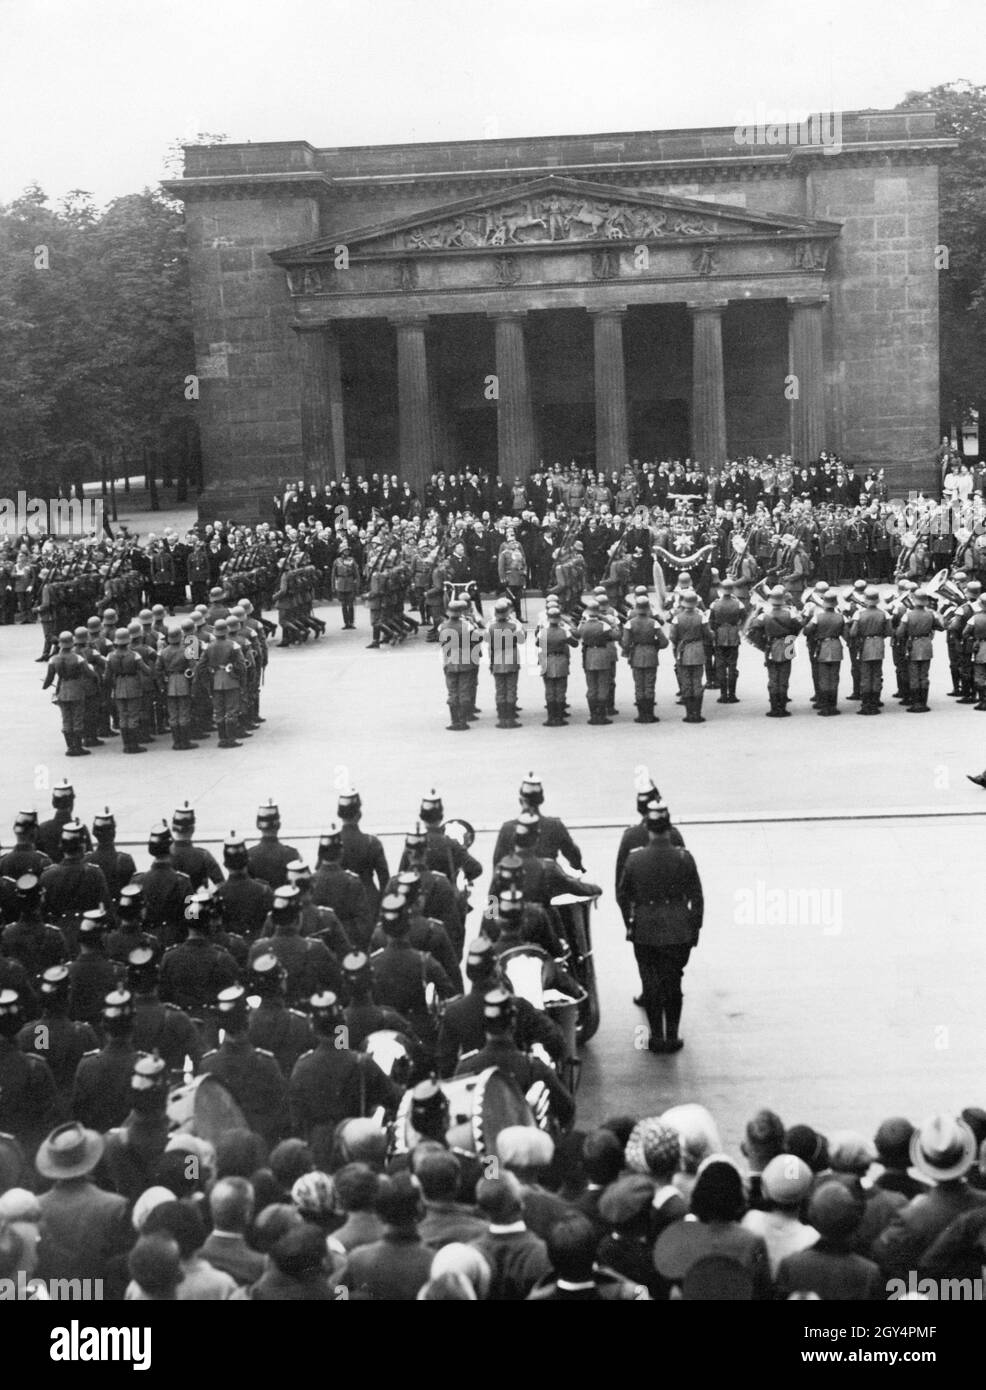 A military parade marches down the street Unter den Linden and past the Neue Wache in Berlin-Mitte in 1931. Military and police bands play to the assembled spectators. [automated translation] Stock Photo